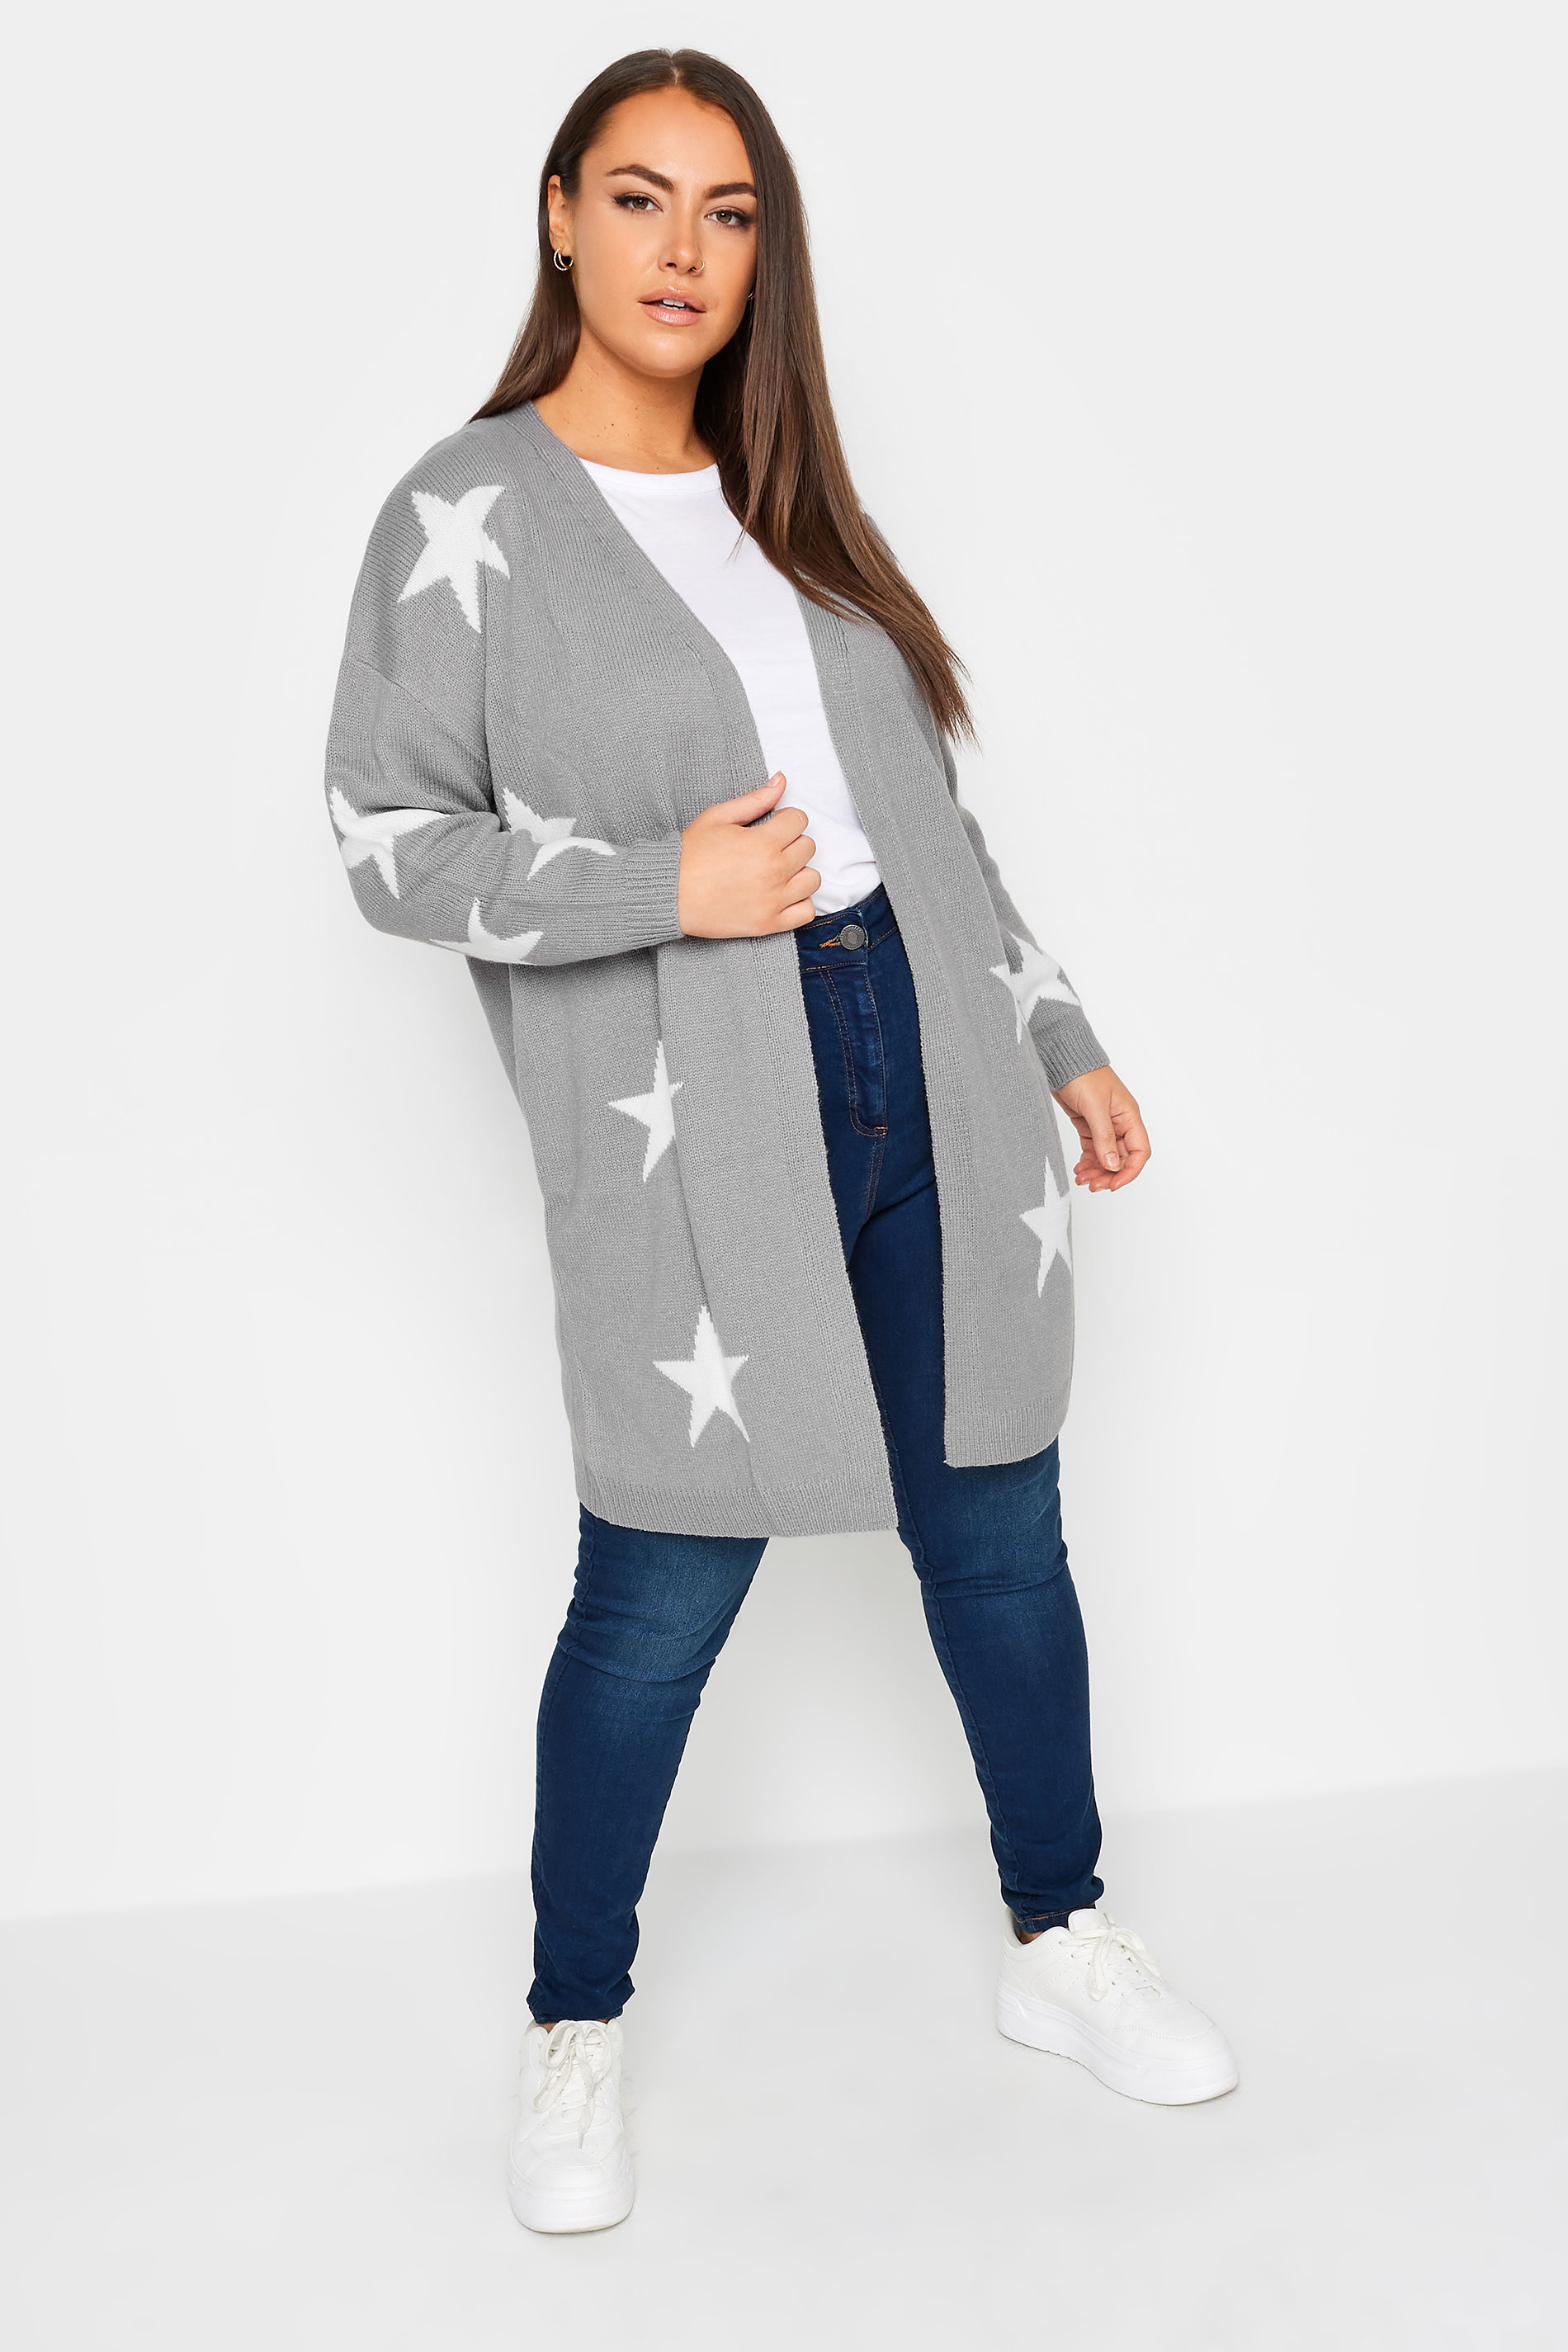 YOURS Plus Size Grey Star Print Longline Cardigan | Yours Clothing 2